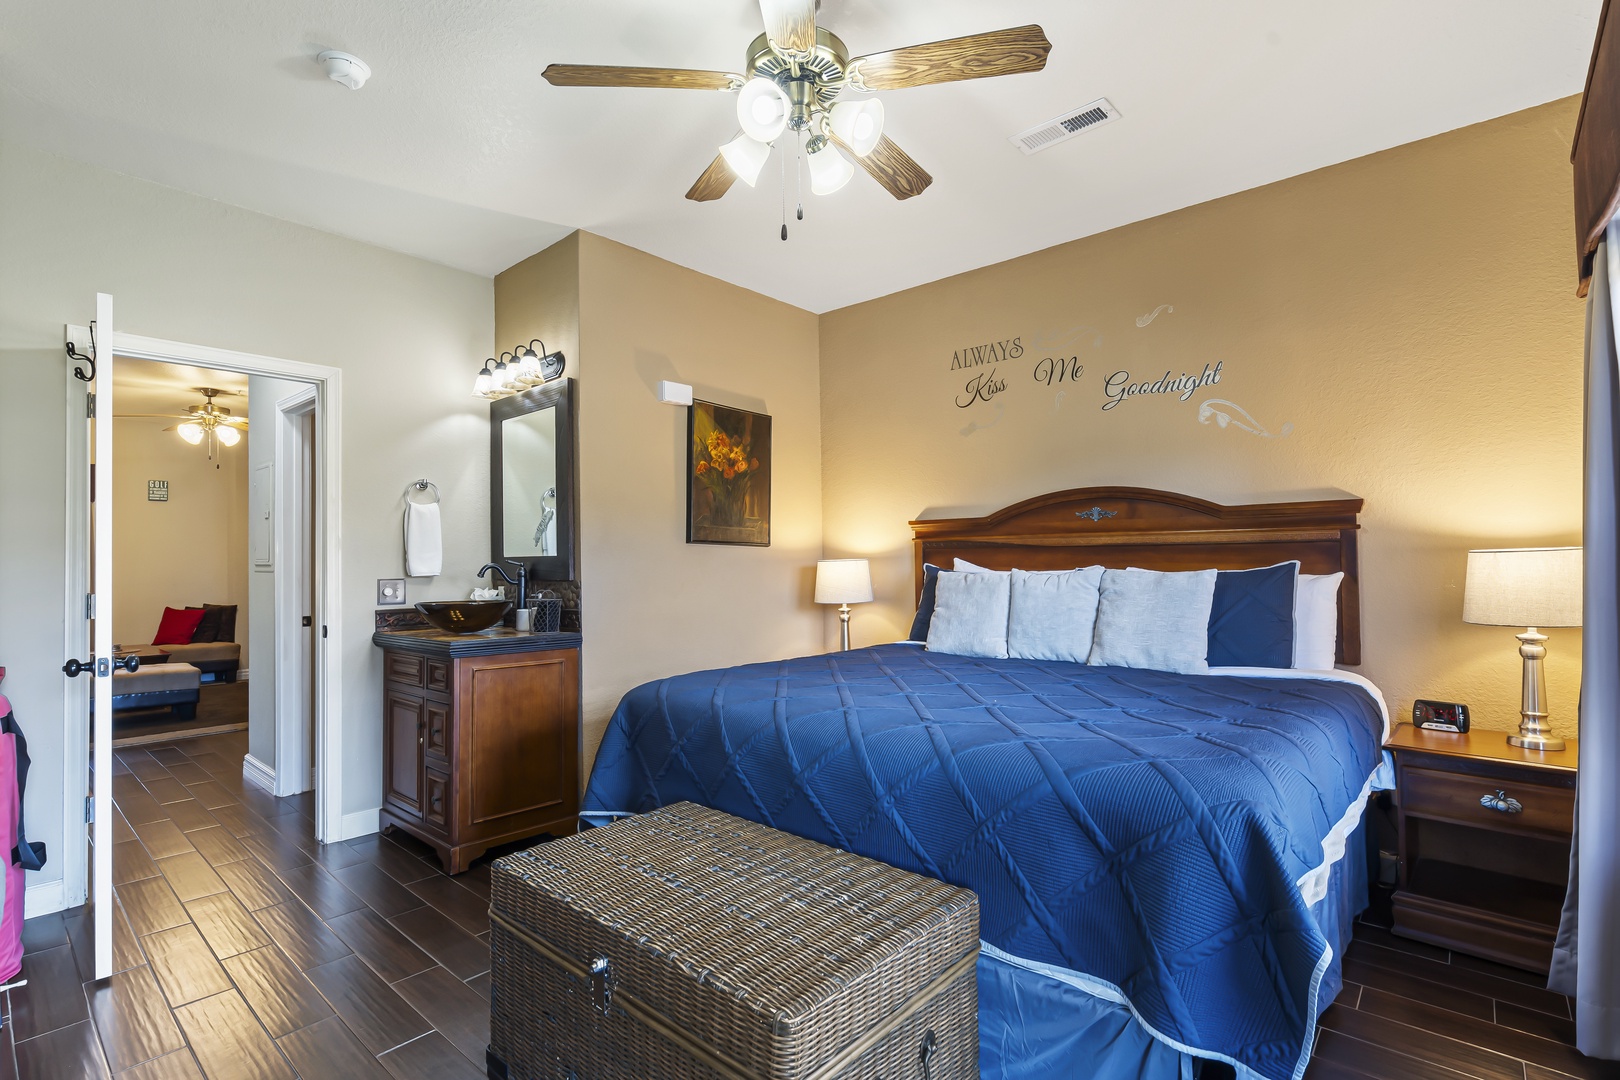 The bedroom includes a regal king bed, Smart TV, & patio access